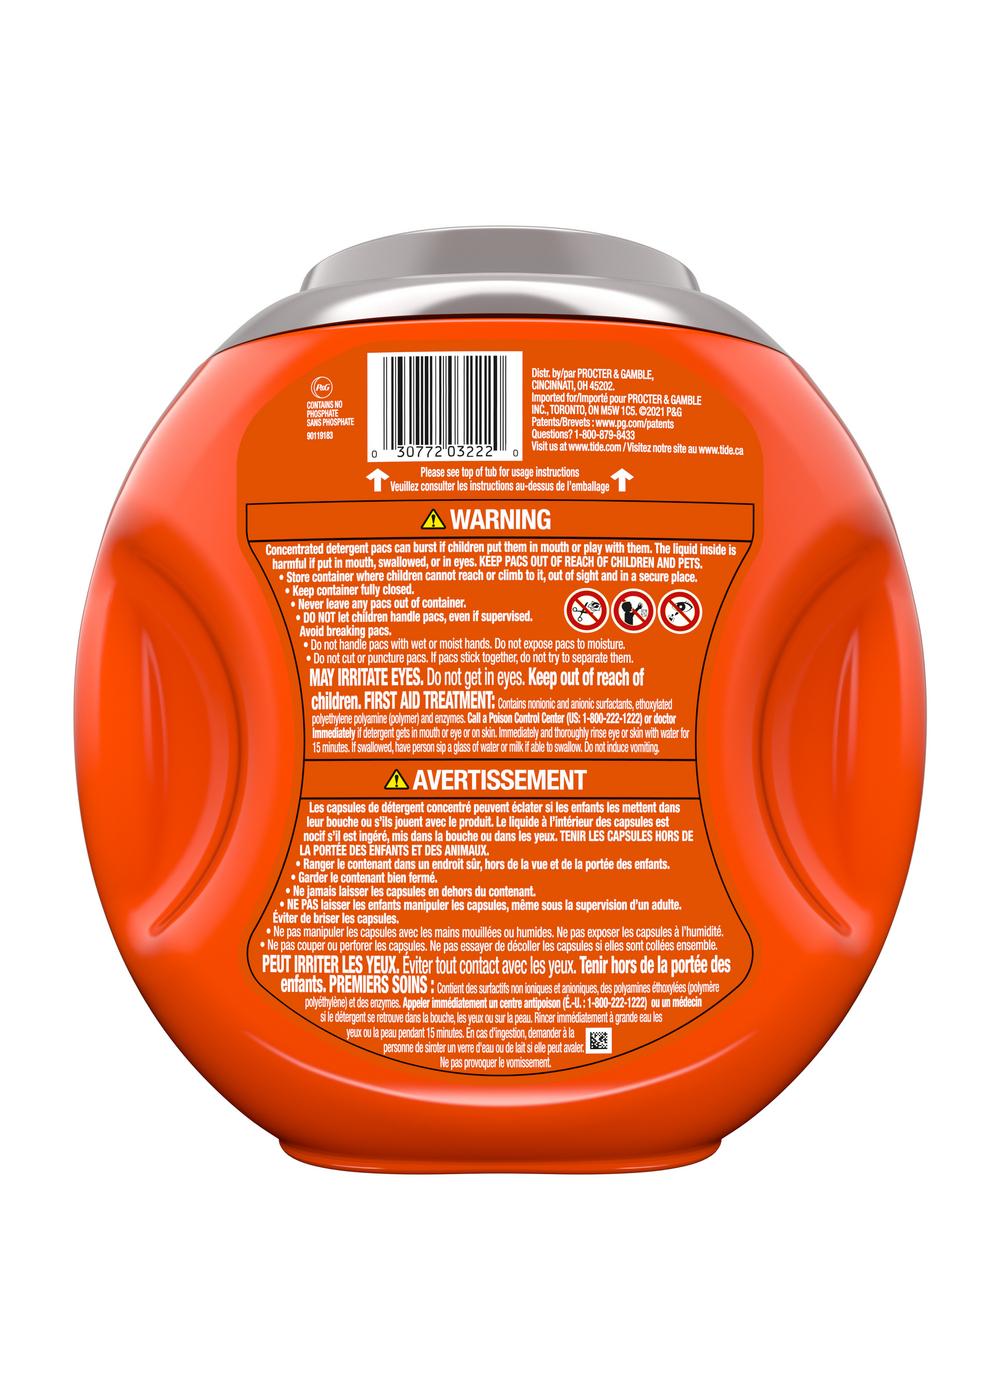 Tide Power PODS Ultra Oxi HE Laundry Detergent; image 7 of 8